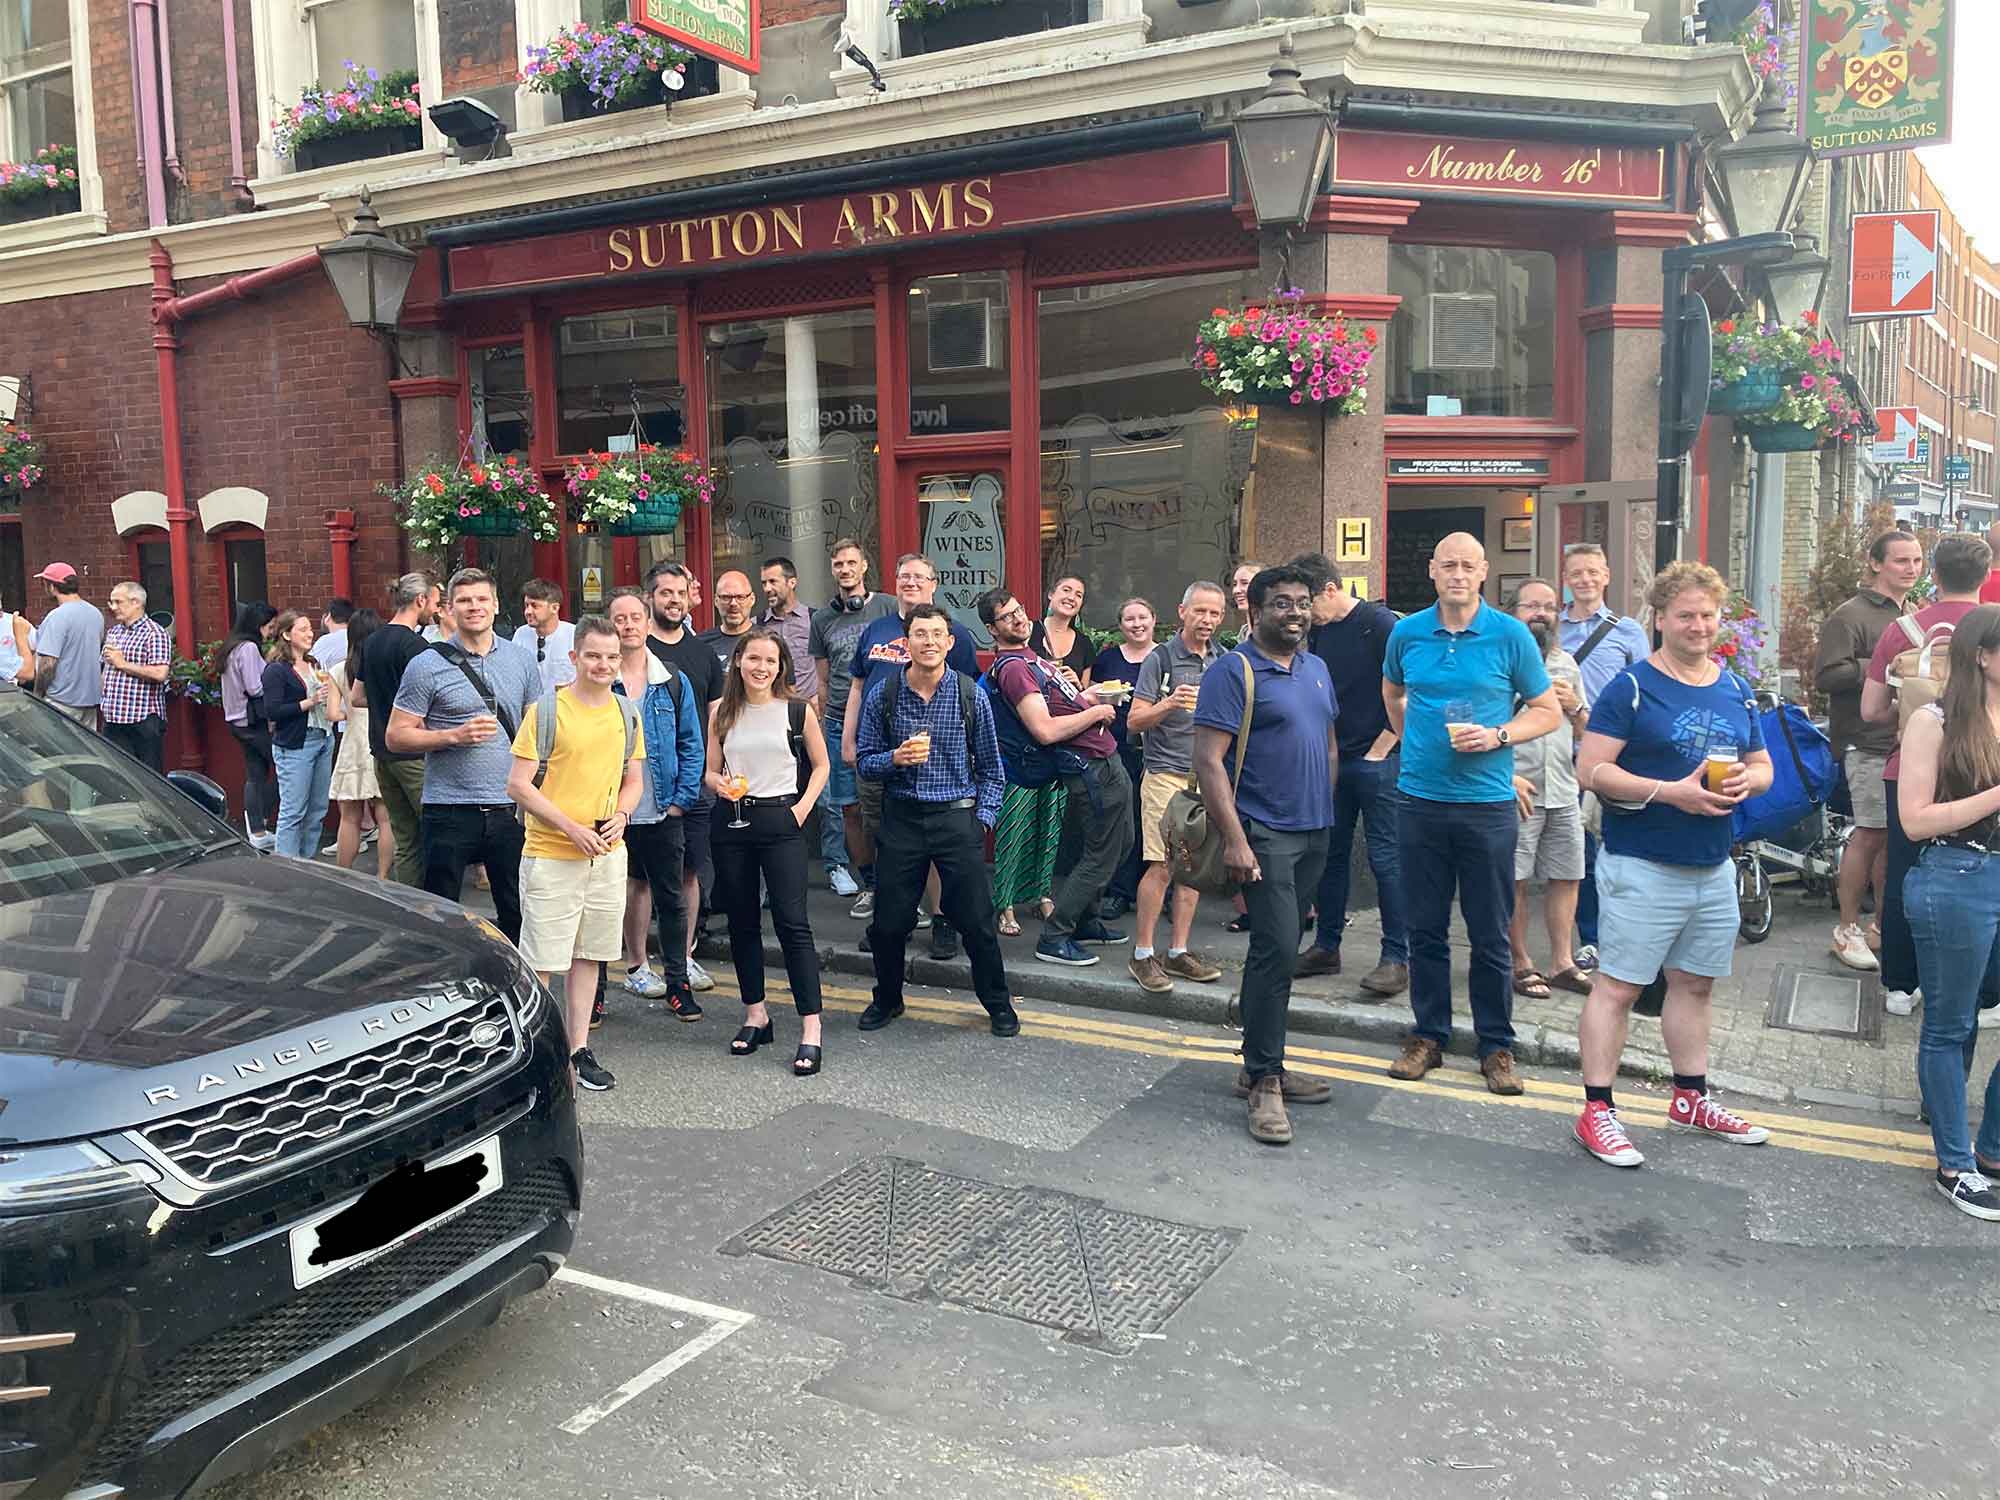 Large group of people gathered outside a pub